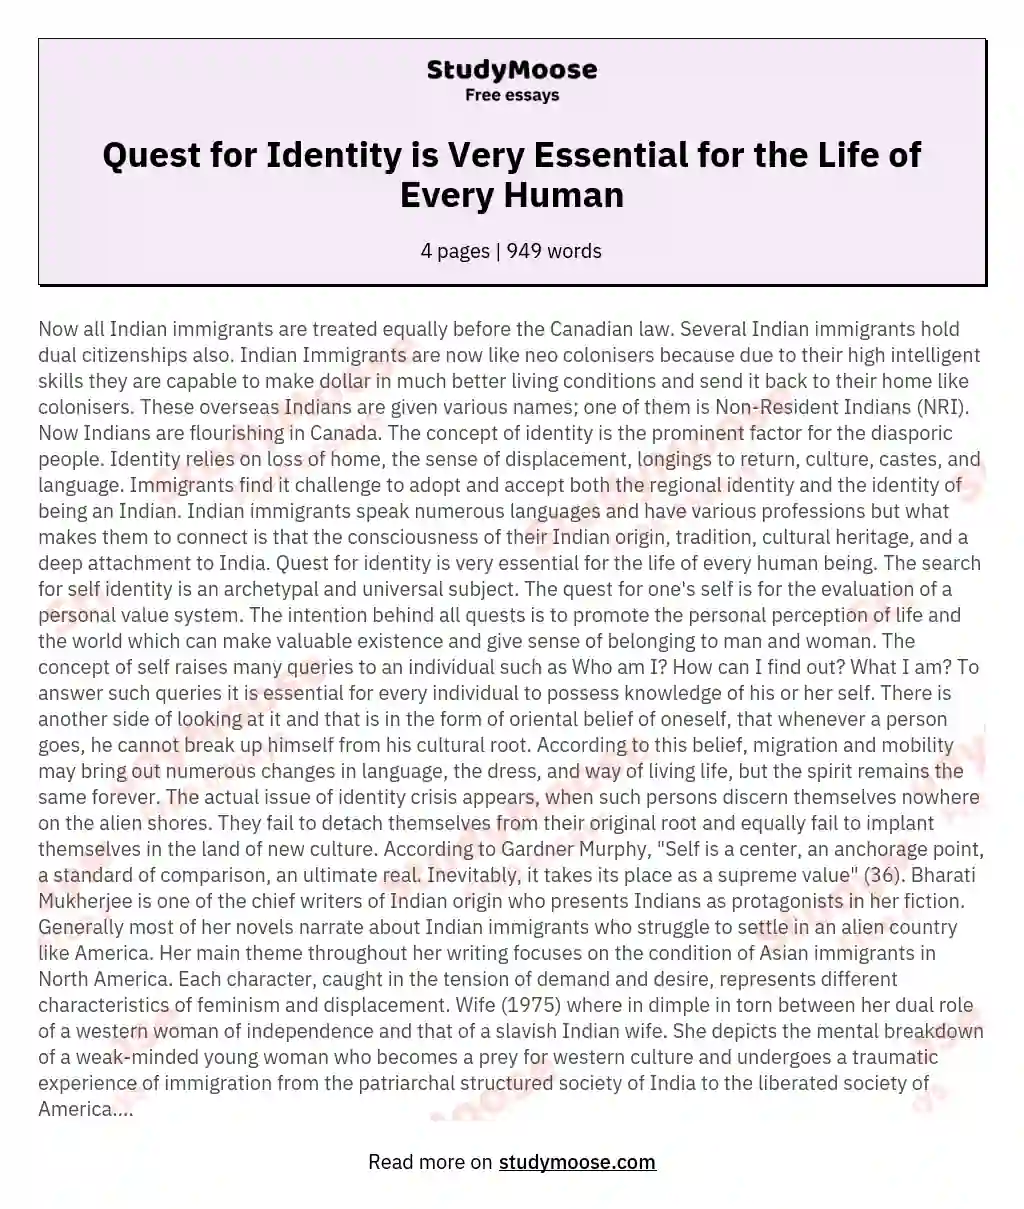 Quest for Identity is Very Essential for the Life of Every Human essay